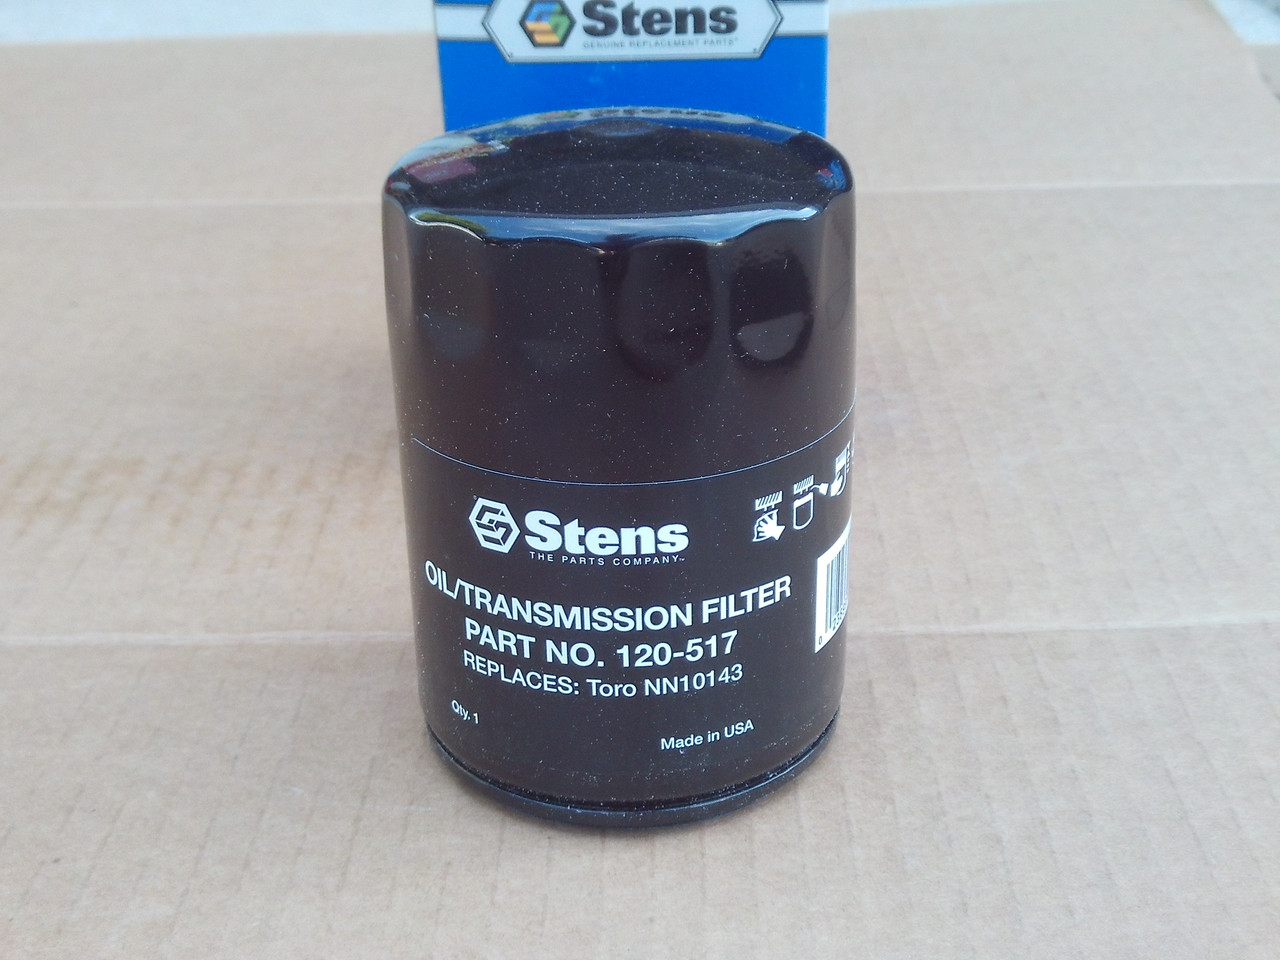 Oil Filter for Onan 1220193, 122B193, 122P193, 122-0193, 122-B193, 122-P193, 16, 20 HP Twin Cylinder, Made In USA